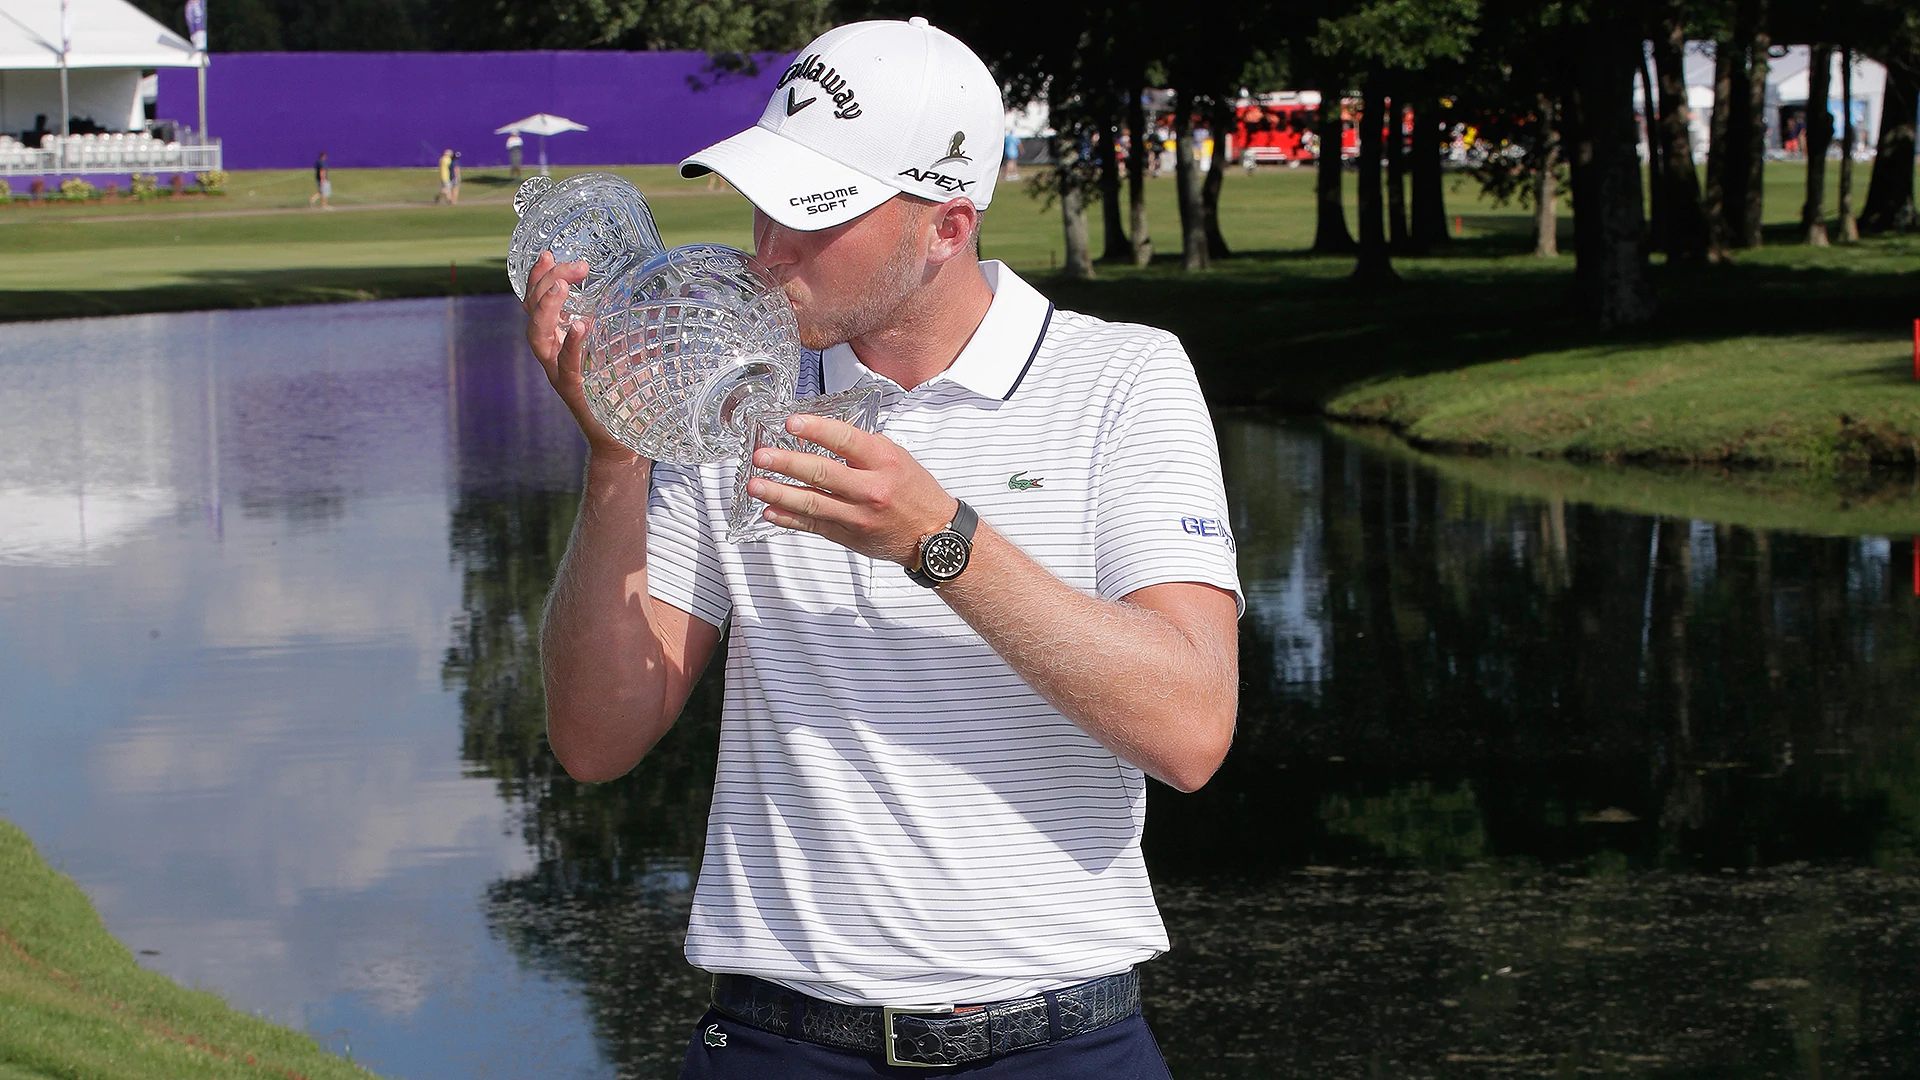 Berger repeats as FedEx St. Jude champ 10